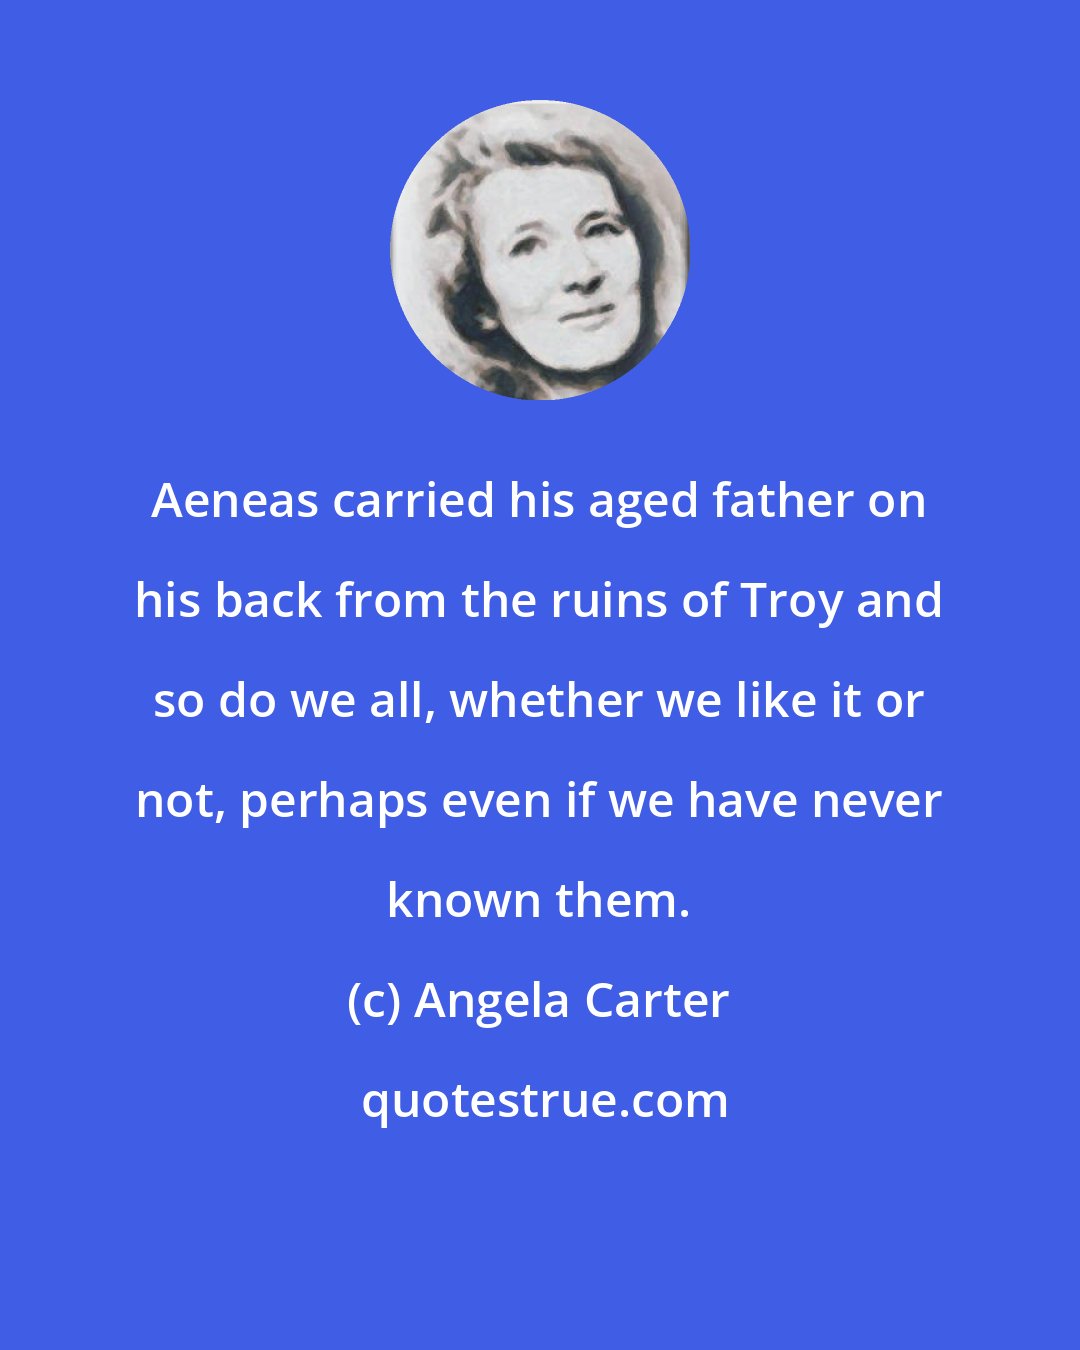 Angela Carter: Aeneas carried his aged father on his back from the ruins of Troy and so do we all, whether we like it or not, perhaps even if we have never known them.